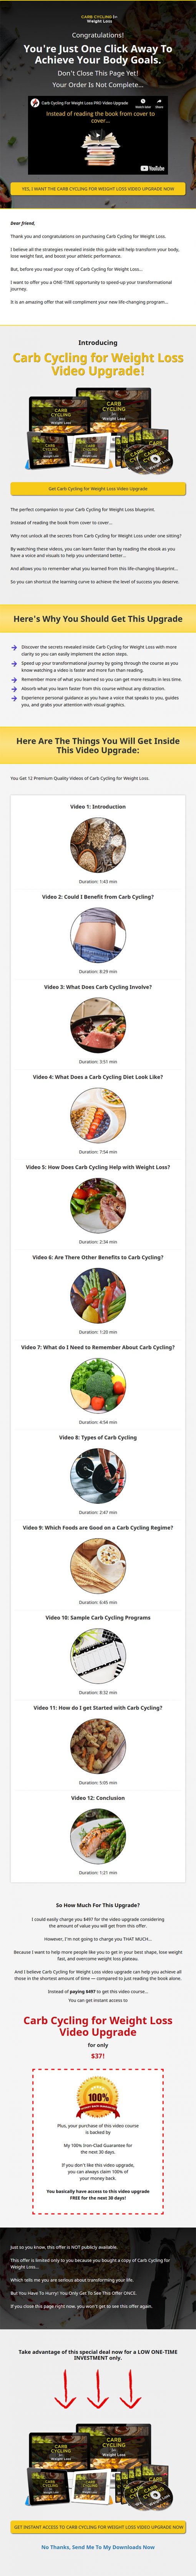 Carb Cycling for Weight Loss Ebook and Videos MRR